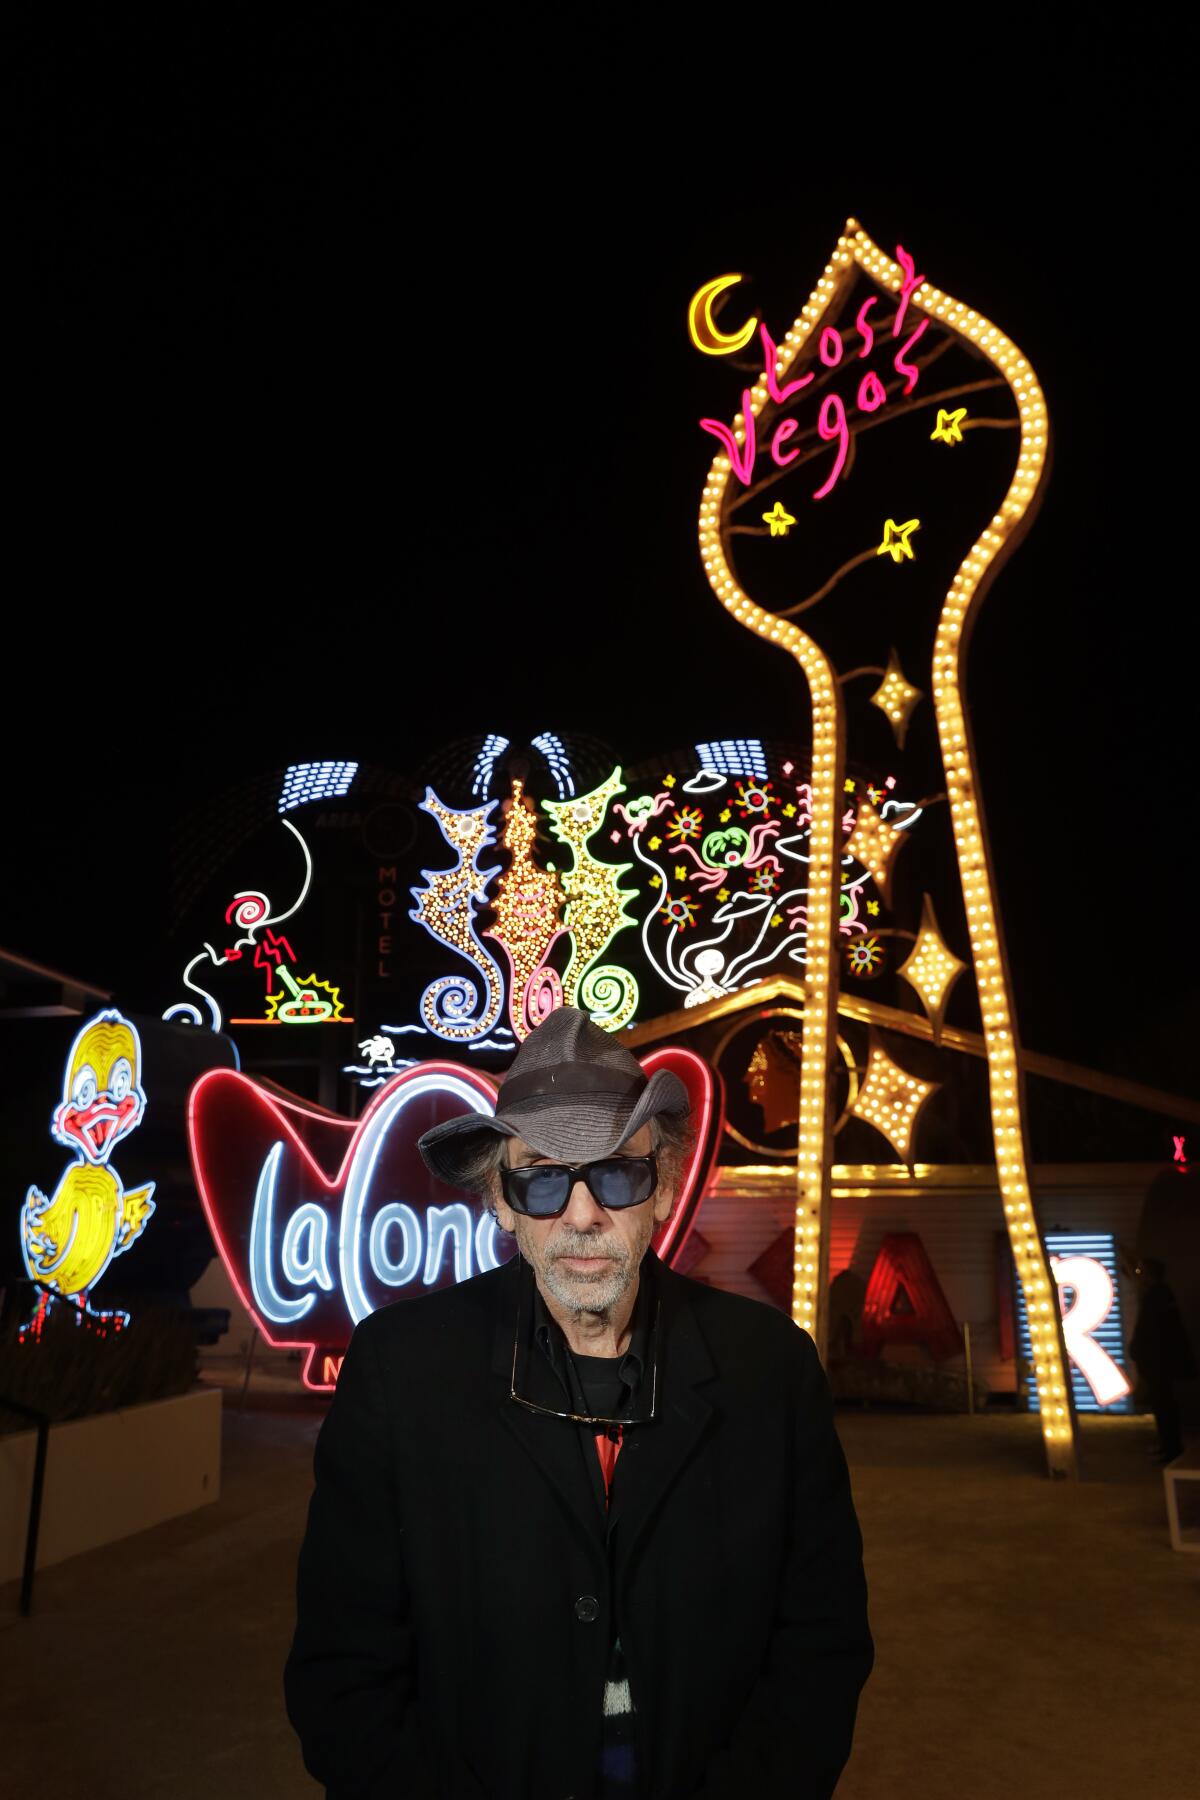 Tim Burton pauses in front of "Neon Grid Wall" and "Lost Vegas Sign Tower" at his "Lost Vegas" exhibit at the Neon Museum in Las Vegas.